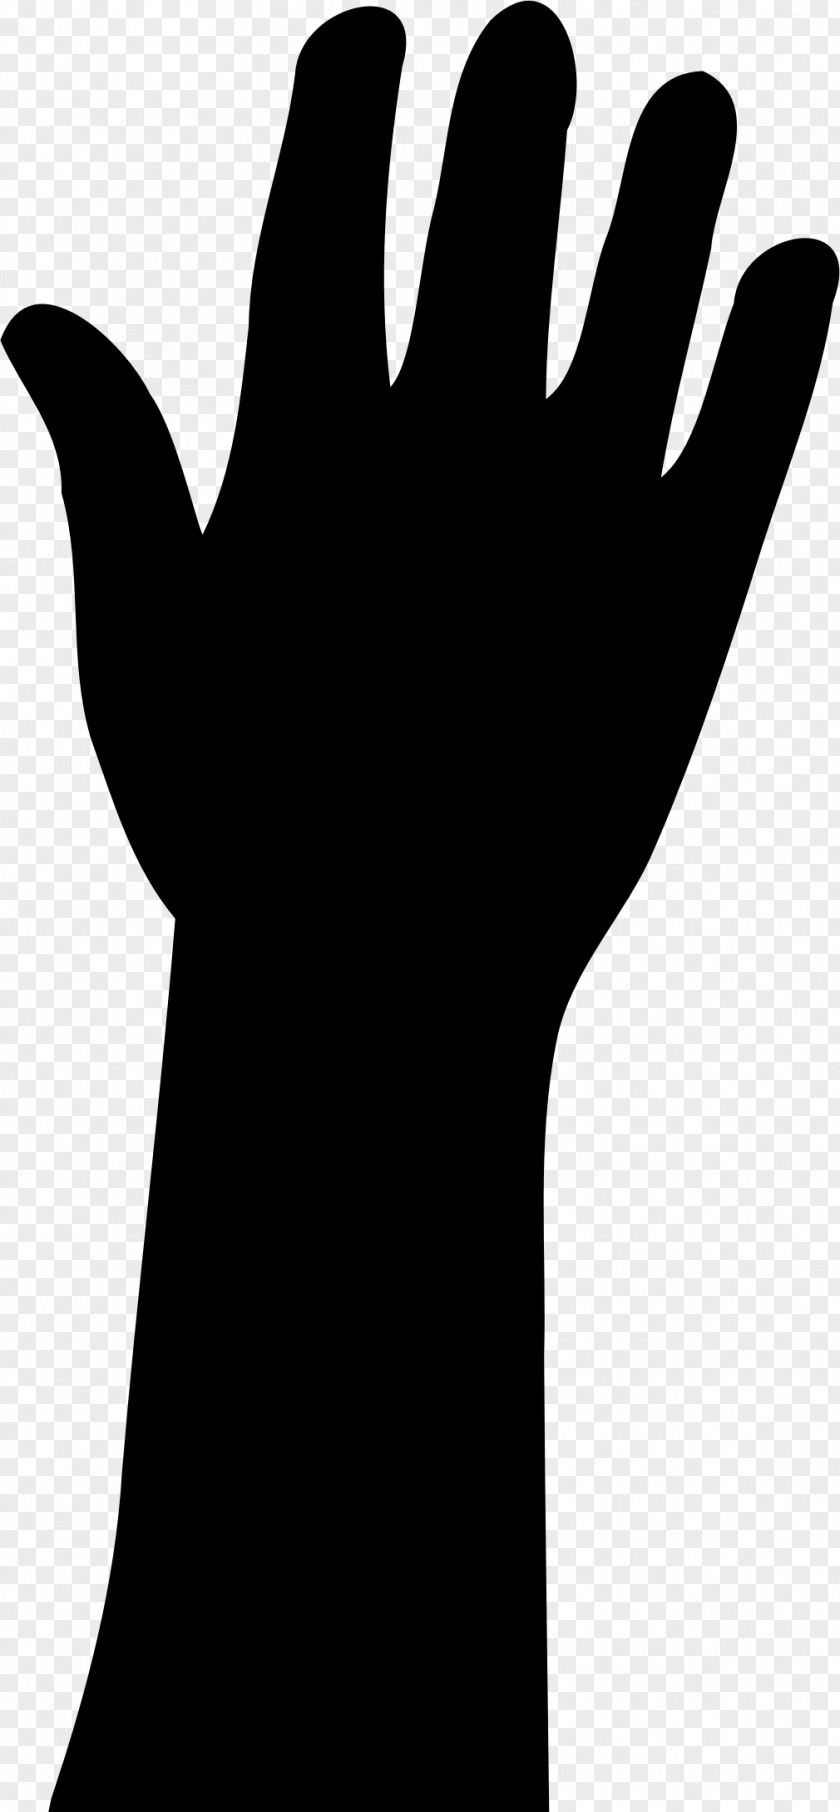 Hand Silhouette Clip Art PNG